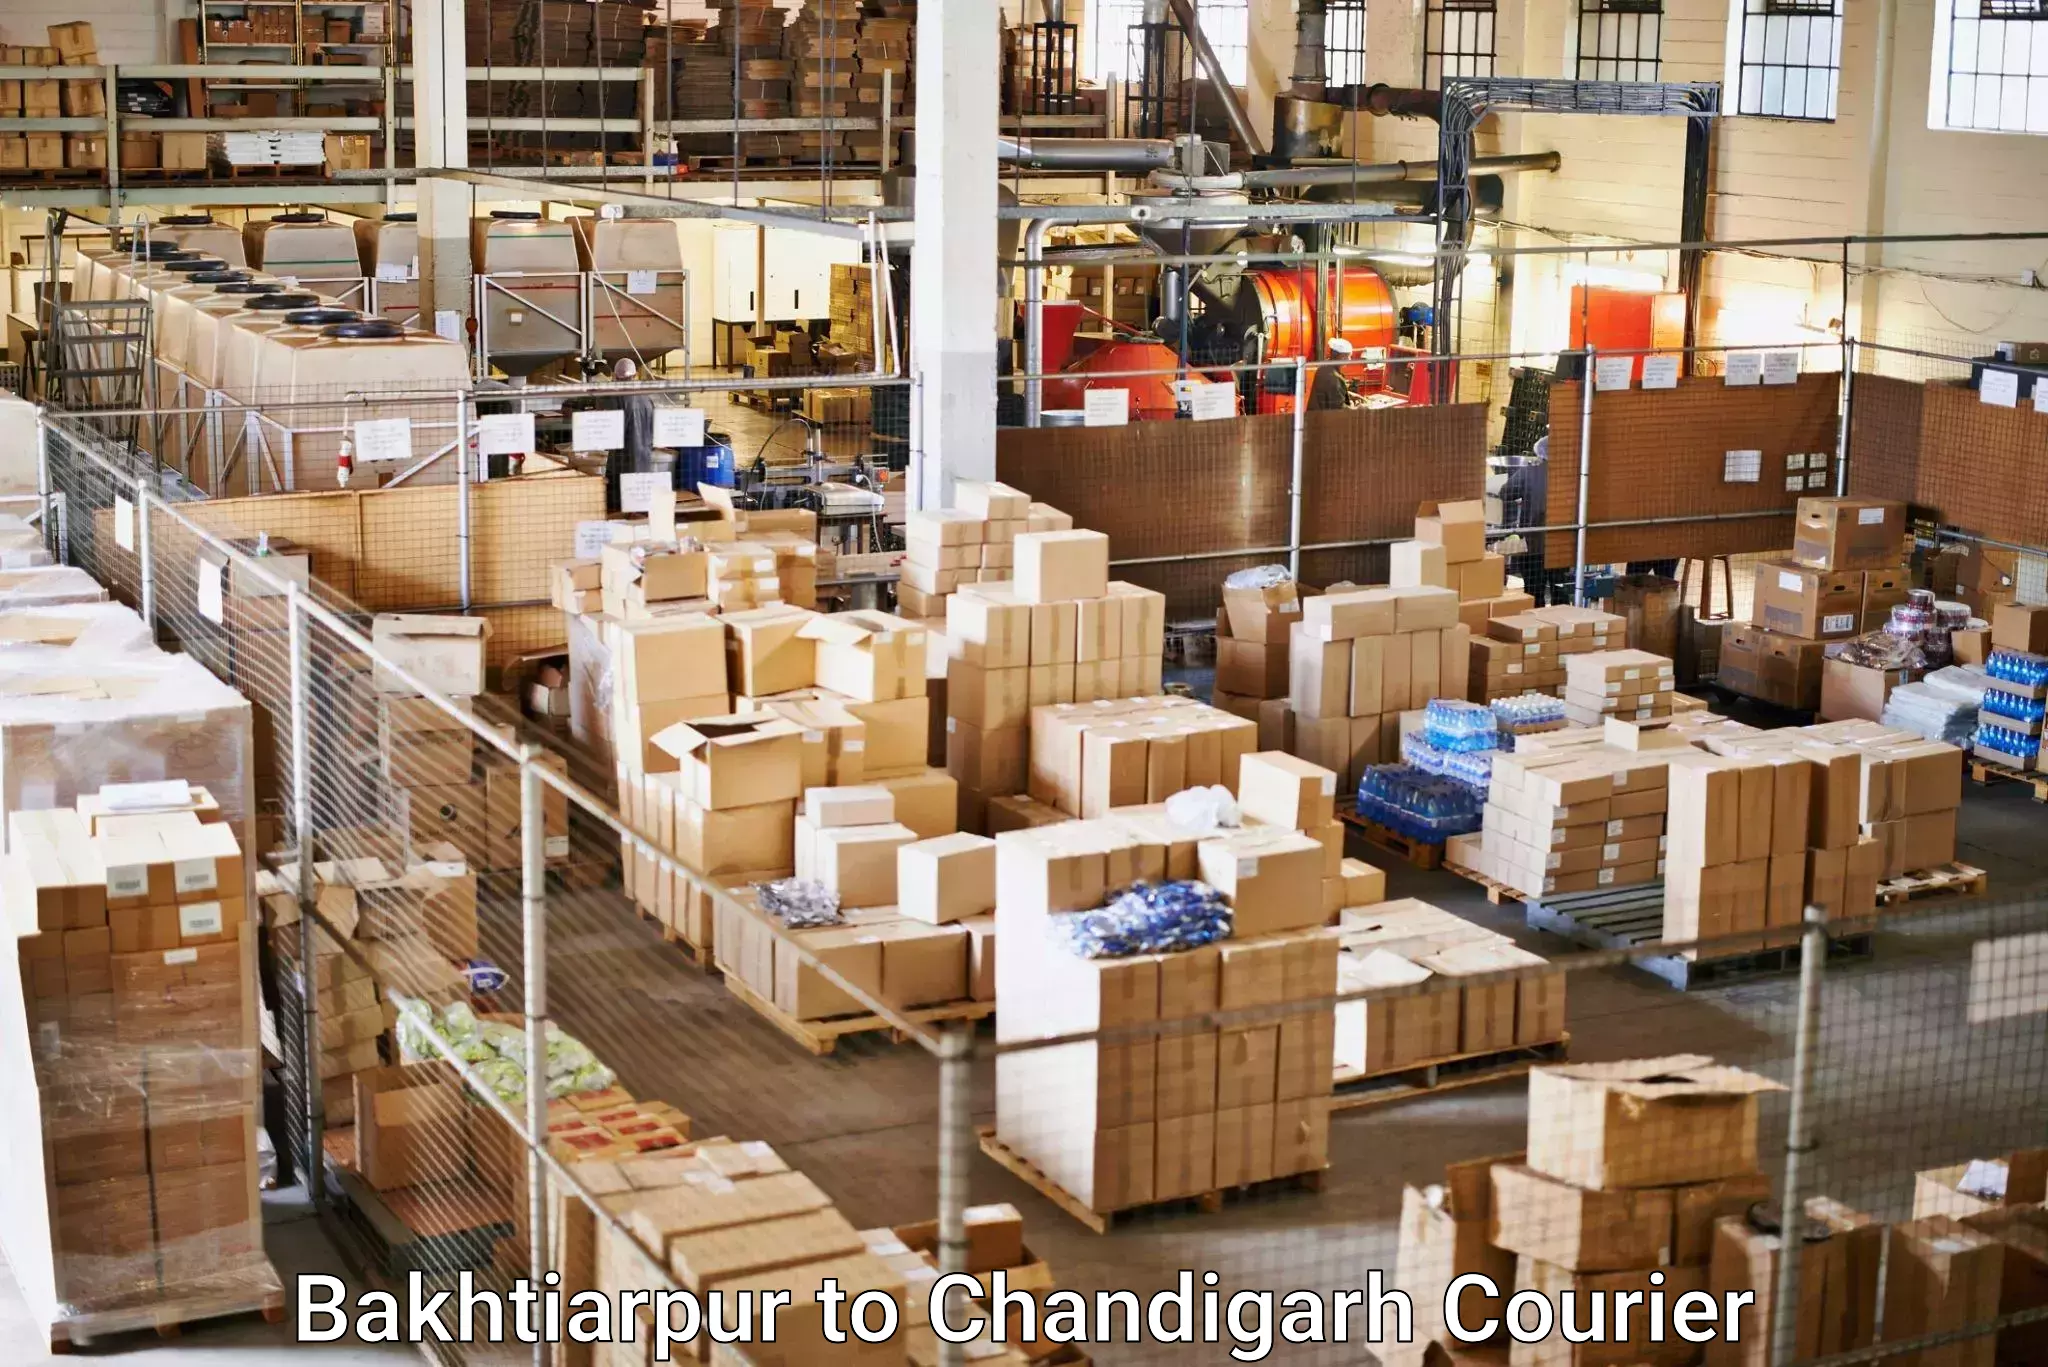 Global freight services Bakhtiarpur to Chandigarh